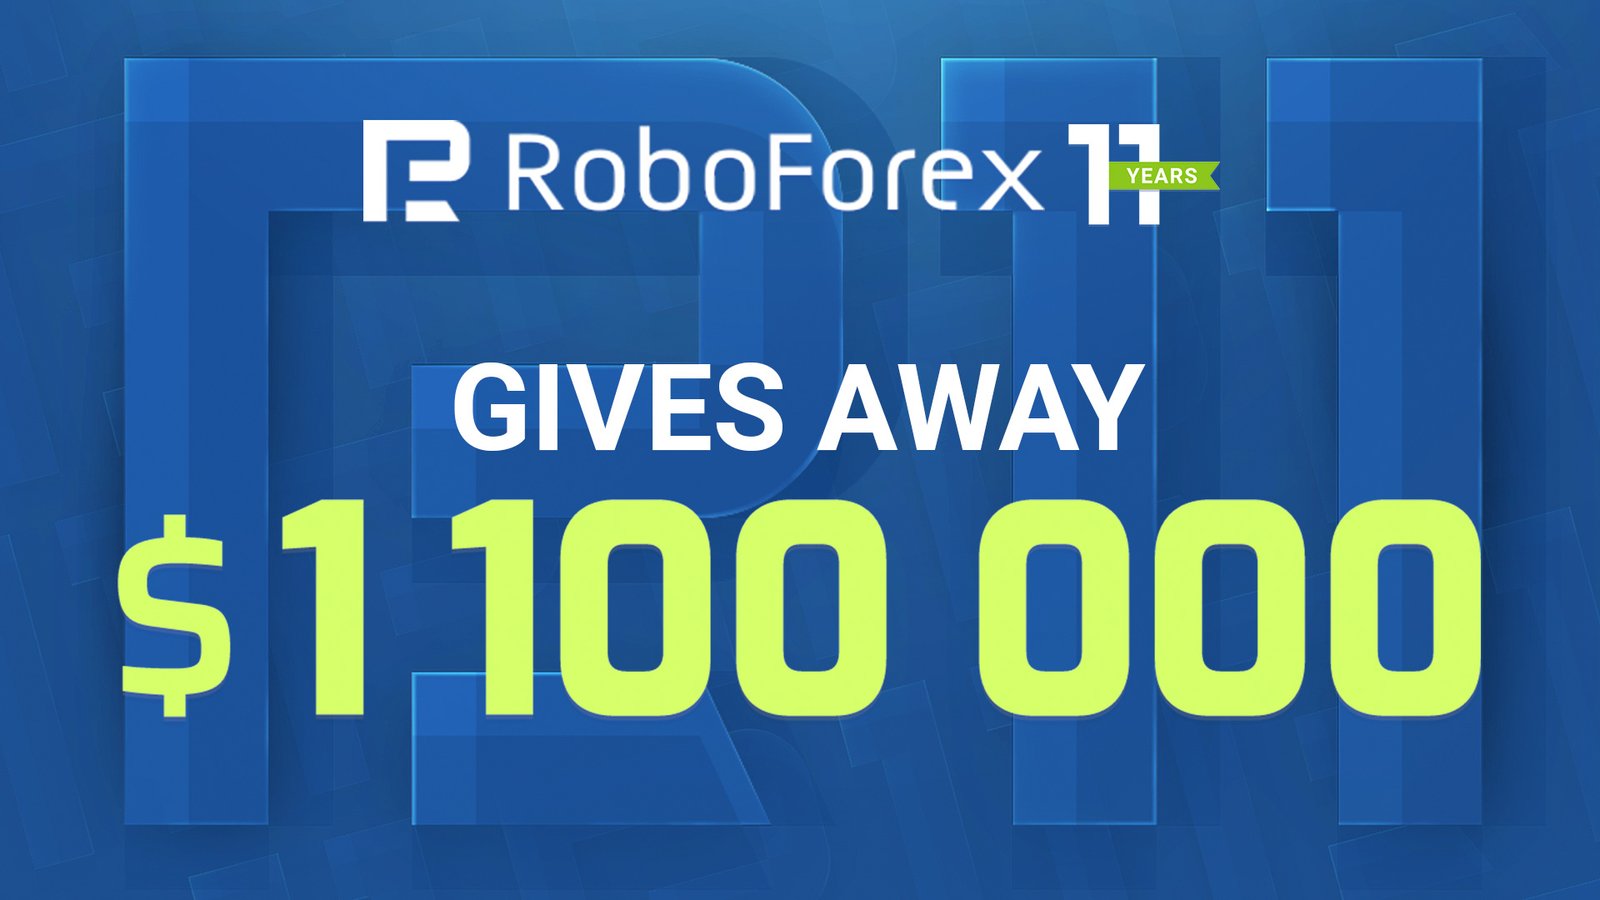 RoboForex Gives Away $1,100,000 on the Occasion of Its 11th Birthday